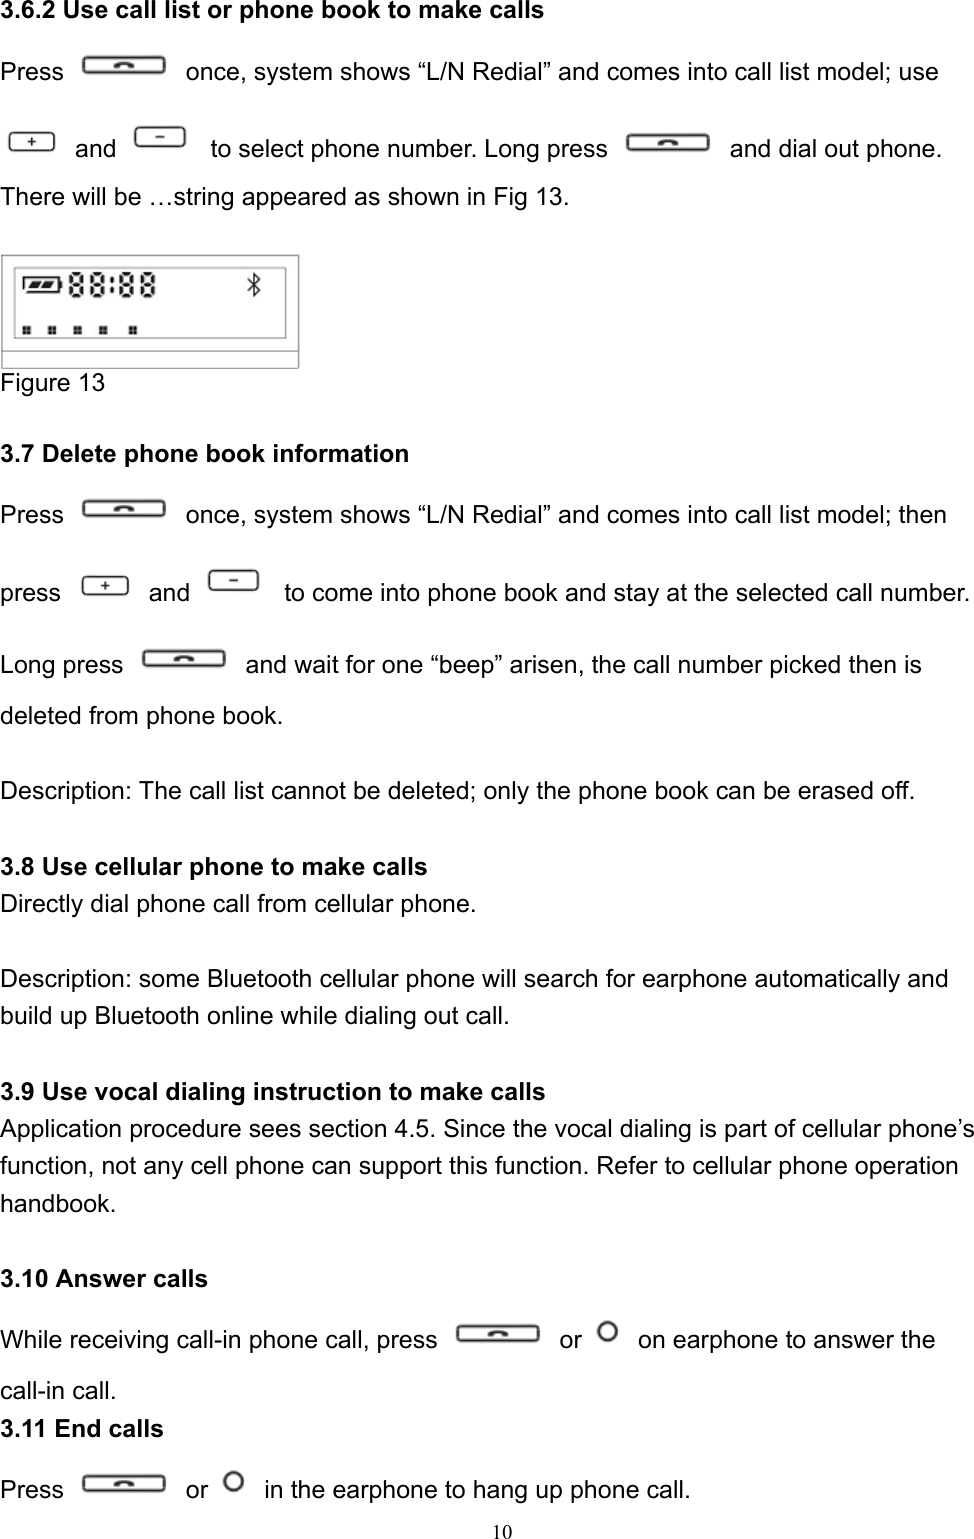  10 3.6.2 Use call list or phone book to make calls Press    once, system shows “L/N Redial” and comes into call list model; use  and    to select phone number. Long press    and dial out phone. There will be …string appeared as shown in Fig 13.   Figure 13  3.7 Delete phone book information Press    once, system shows “L/N Redial” and comes into call list model; then press   and    to come into phone book and stay at the selected call number. Long press    and wait for one “beep” arisen, the call number picked then is deleted from phone book.  Description: The call list cannot be deleted; only the phone book can be erased off.    3.8 Use cellular phone to make calls Directly dial phone call from cellular phone.    Description: some Bluetooth cellular phone will search for earphone automatically and build up Bluetooth online while dialing out call.  3.9 Use vocal dialing instruction to make calls Application procedure sees section 4.5. Since the vocal dialing is part of cellular phone’s function, not any cell phone can support this function. Refer to cellular phone operation handbook.   3.10 Answer calls While receiving call-in phone call, press   or    on earphone to answer the call-in call. 3.11 End calls Press   or    in the earphone to hang up phone call.   